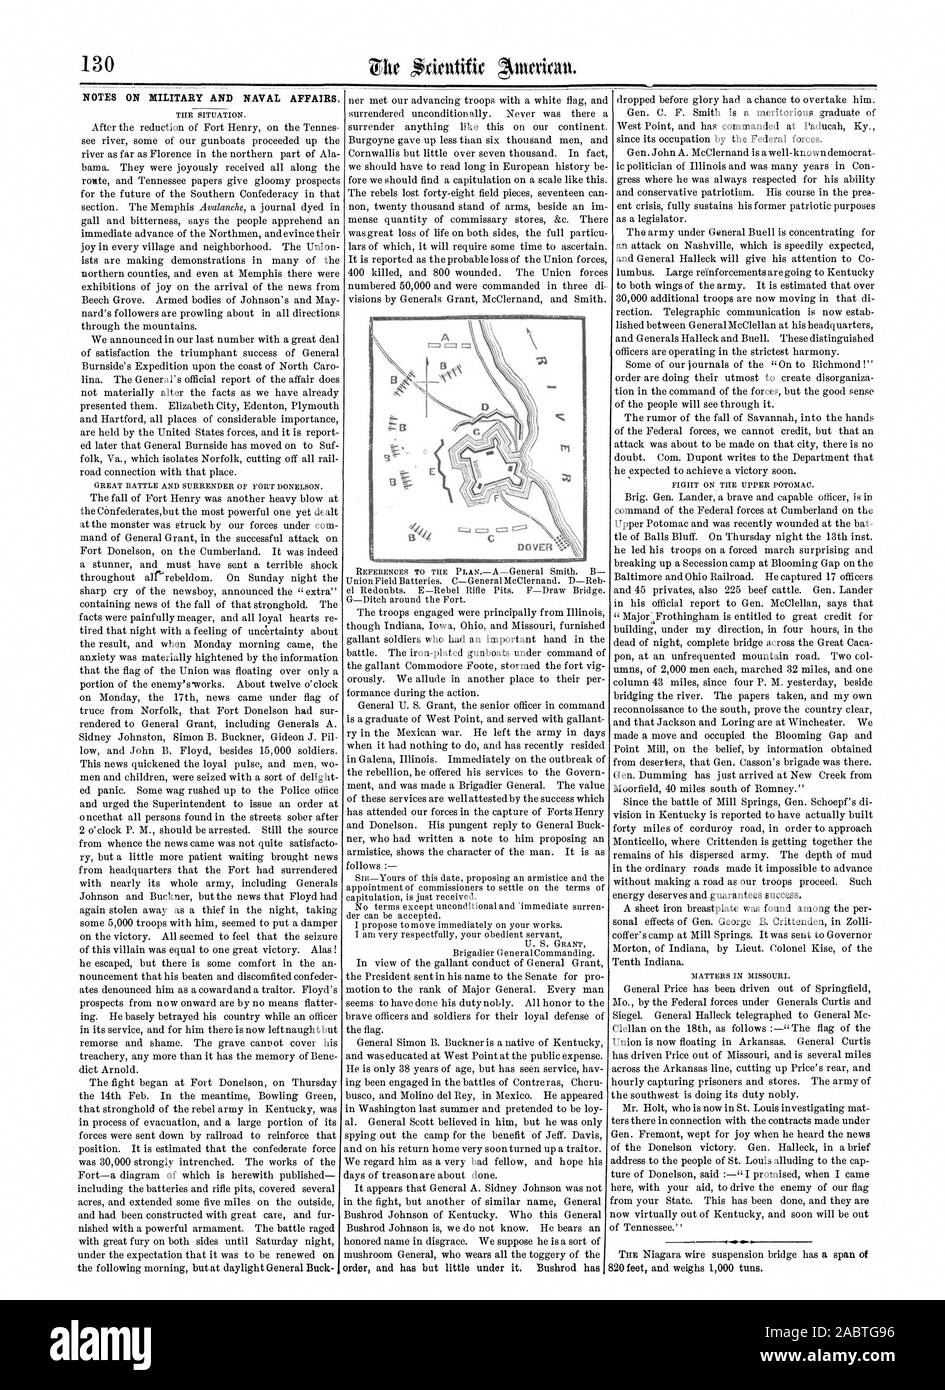 130 citutifir NOTES ON MILITARY AND NAVAL AFFAIRS., scientific american, 1862-03-01 Stock Photo